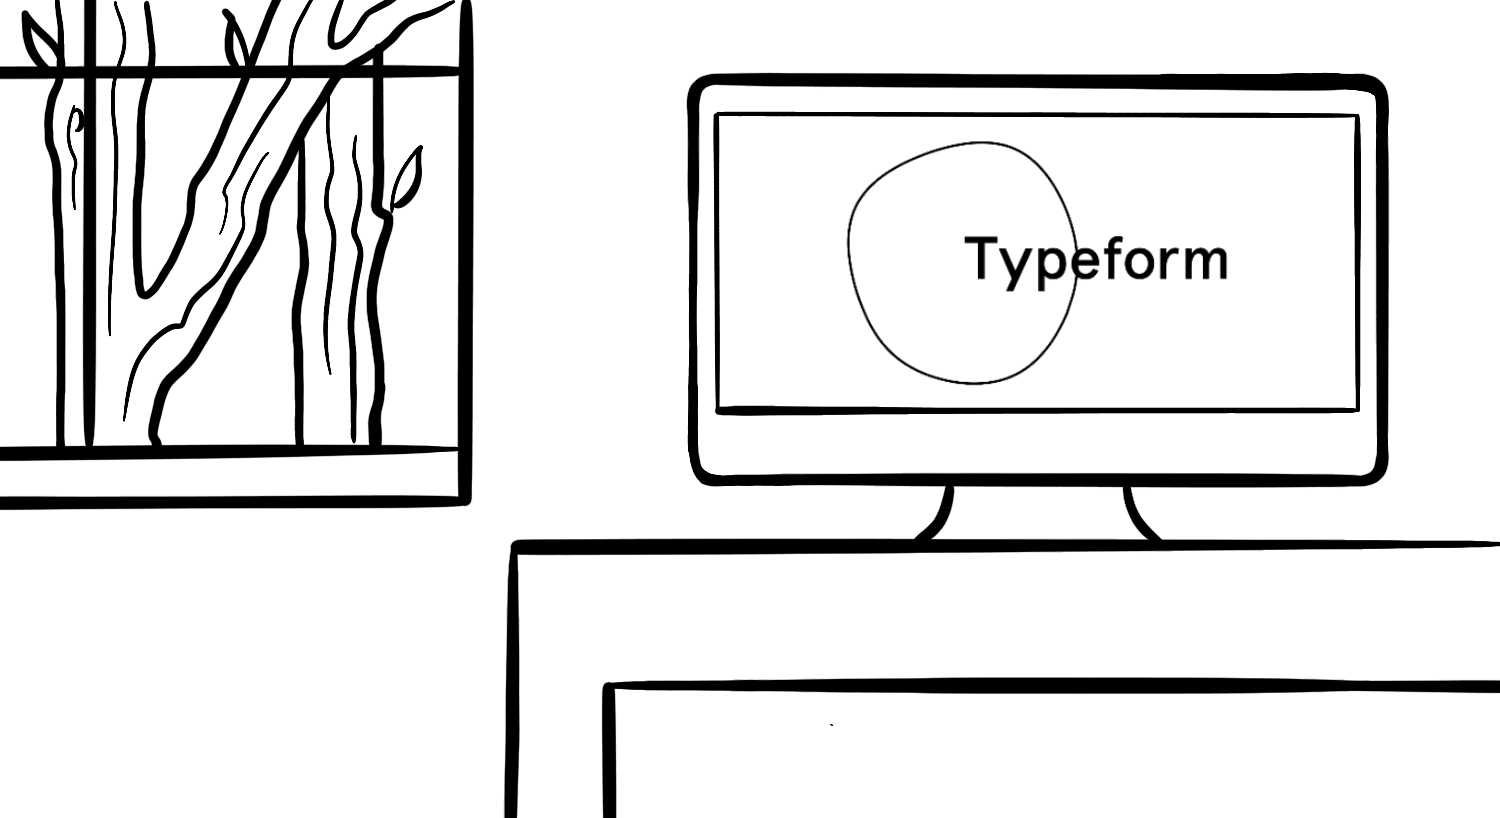 Typeform logo on a computer screen on a desk near a window with a tree in the background